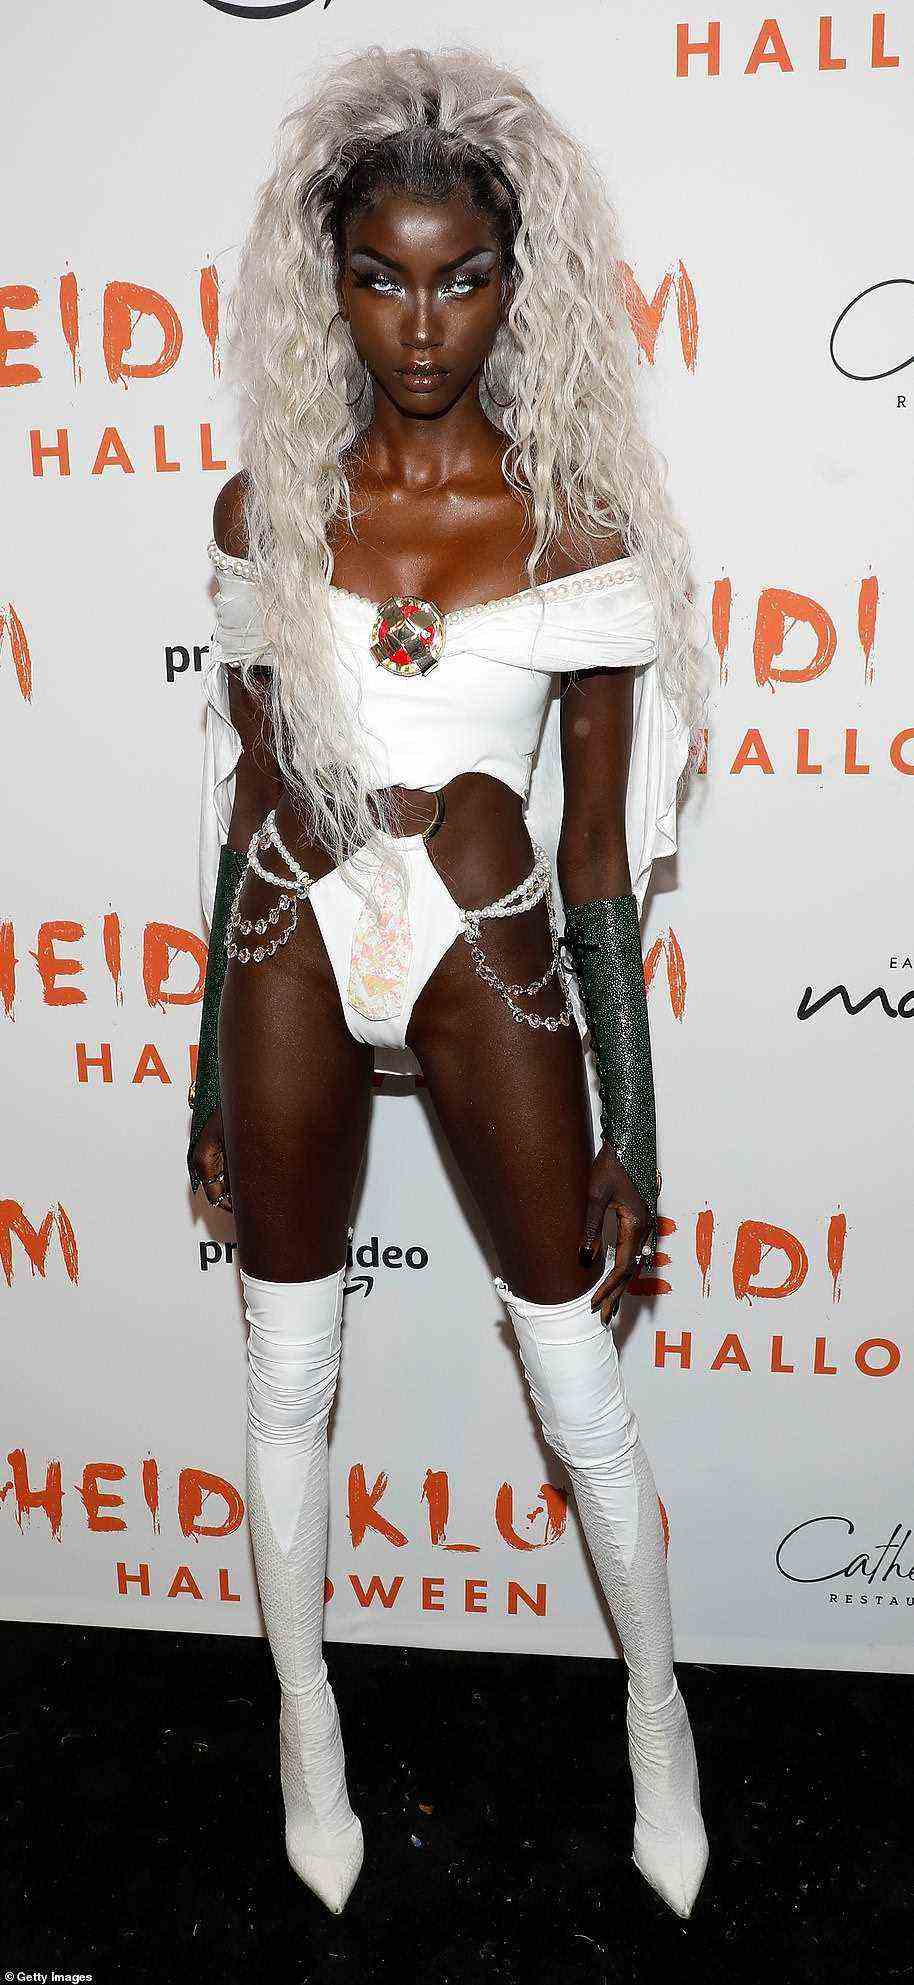 Perhaps the most famous model on the list is Anok Yai, 24, who has A-list pals including Bella Hadid and Heidi Klum. Pictured at Heidi Klum's Halloween party